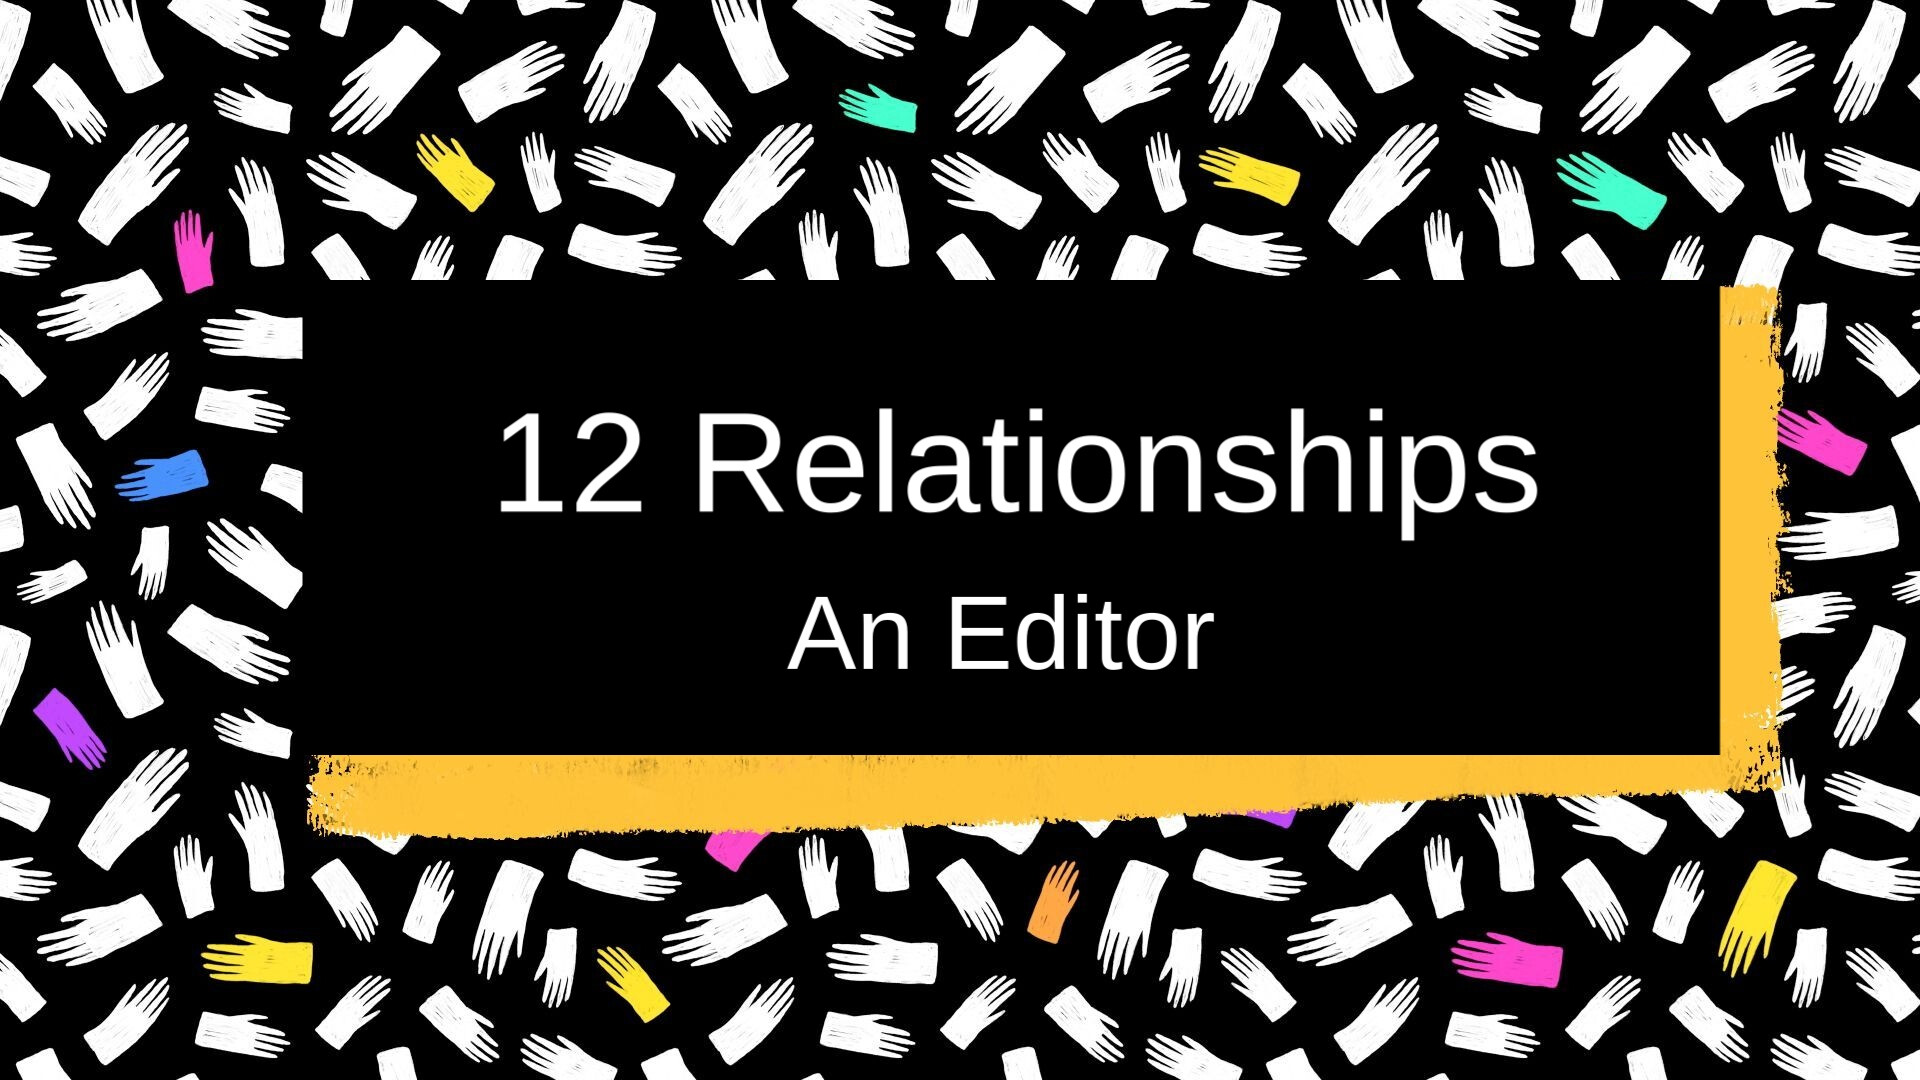 12 Relationships: An Editor